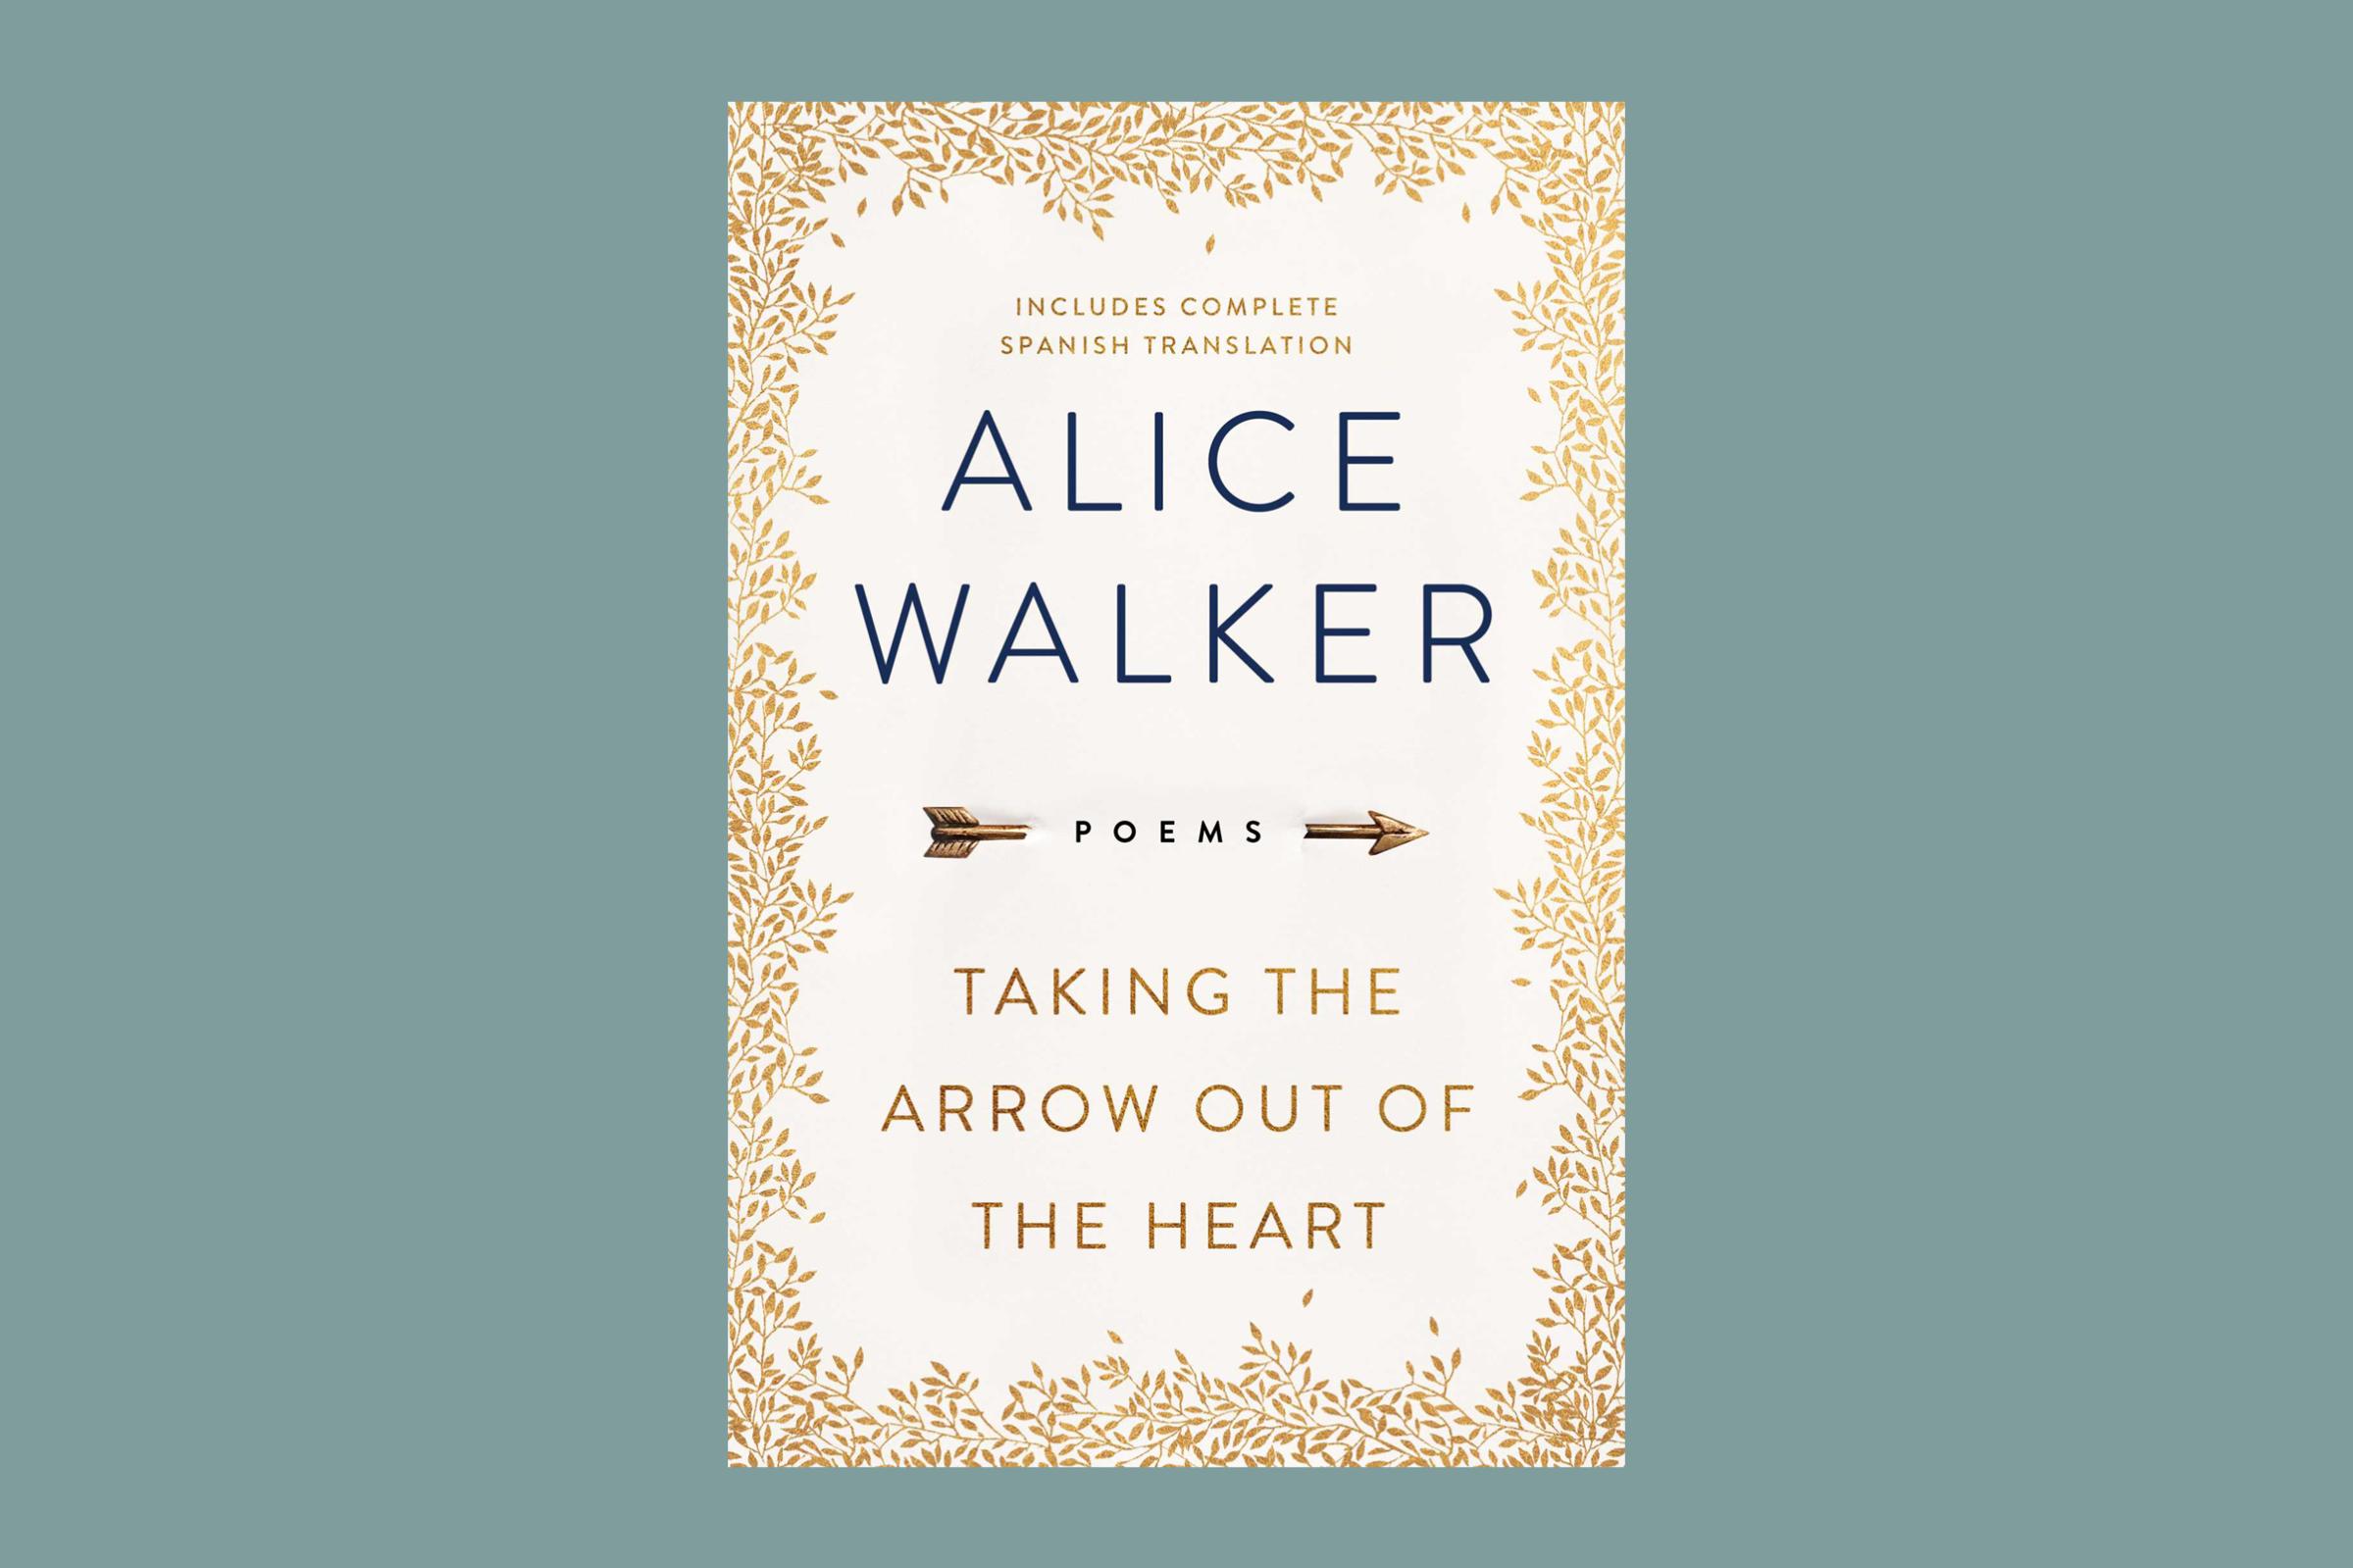 Taking the Arrow out of the Heart by Alice Walker